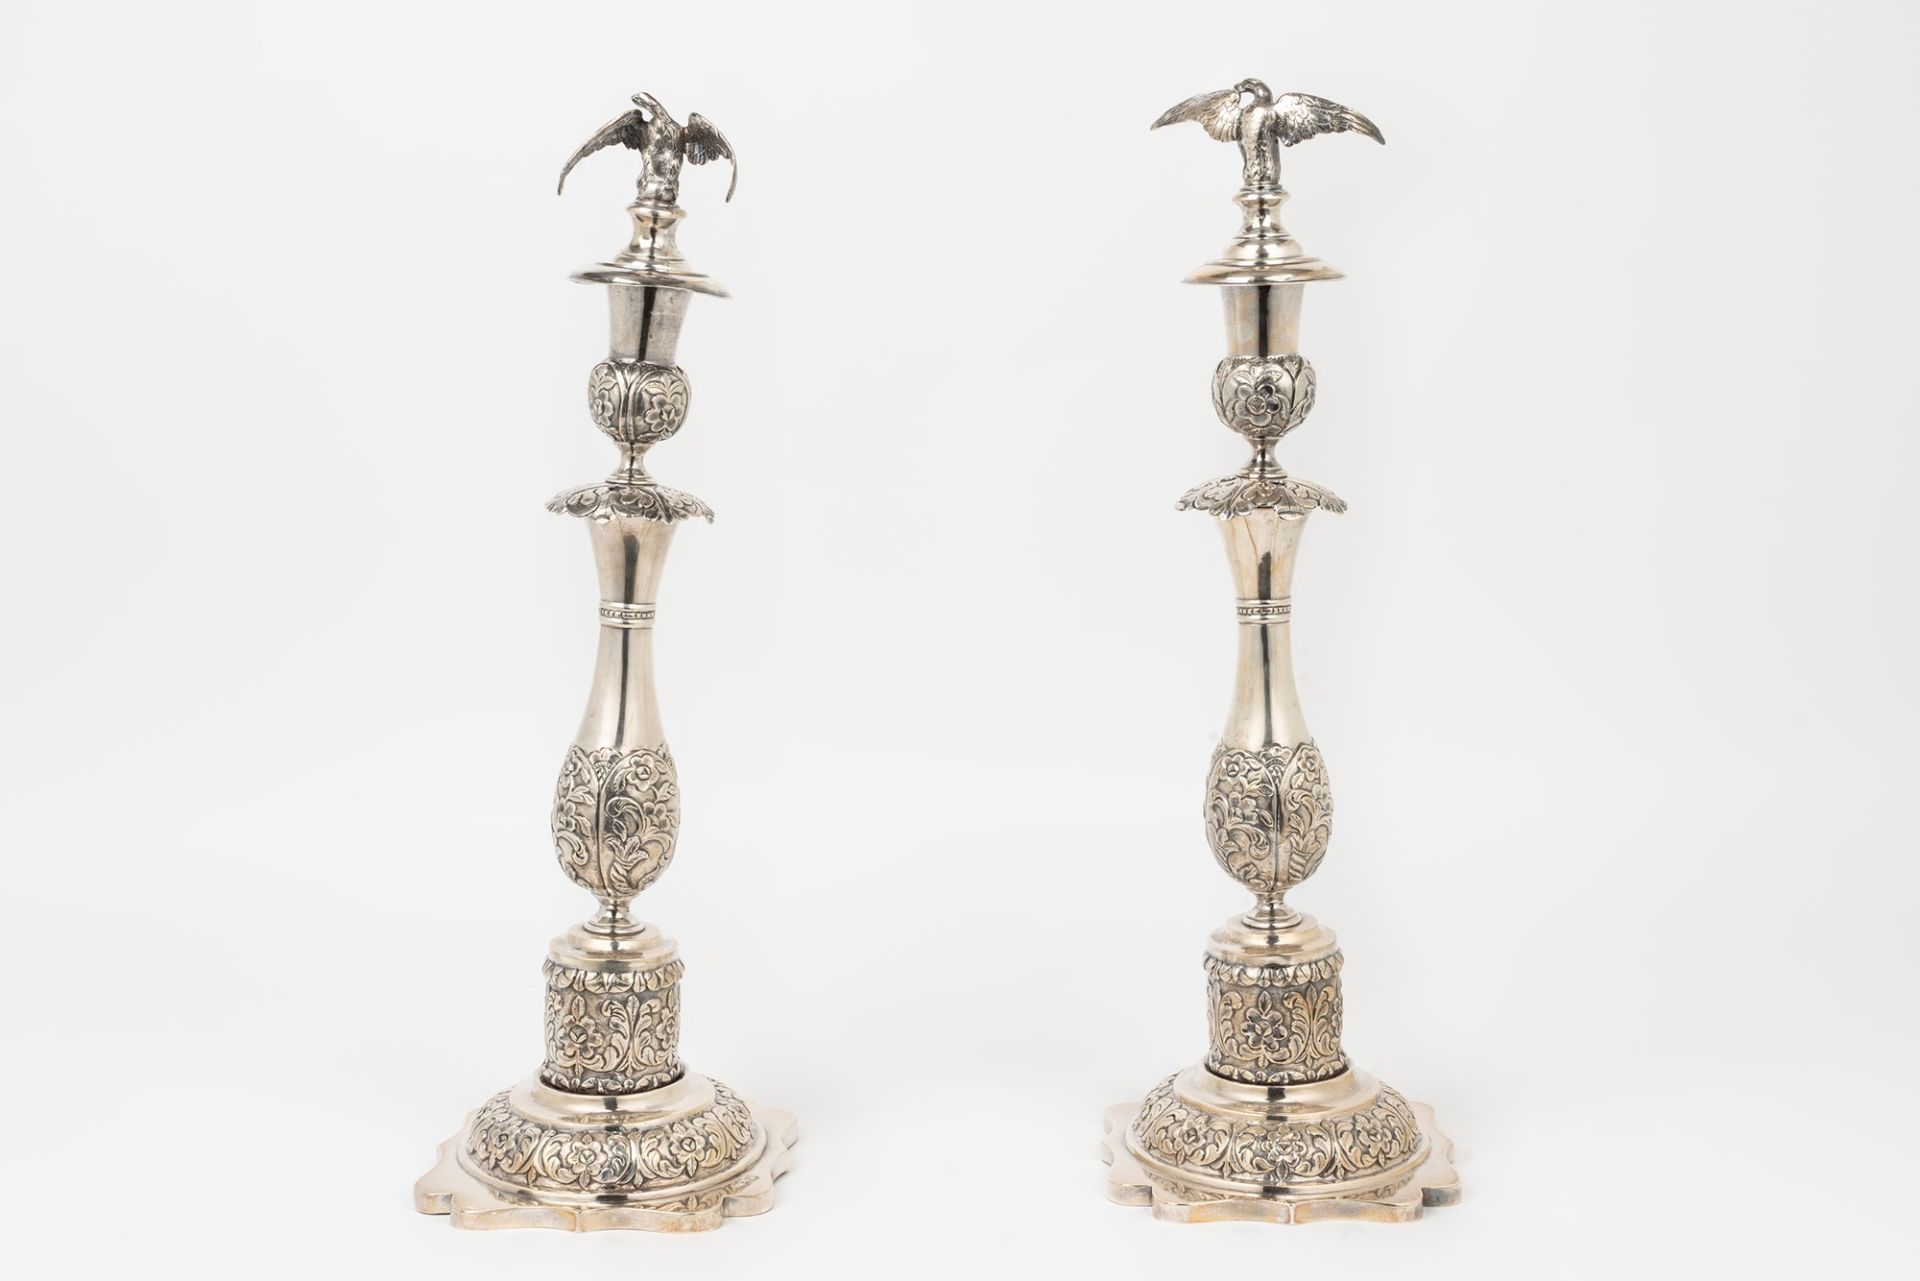 Pair of silver candlesticks, Russia 1862